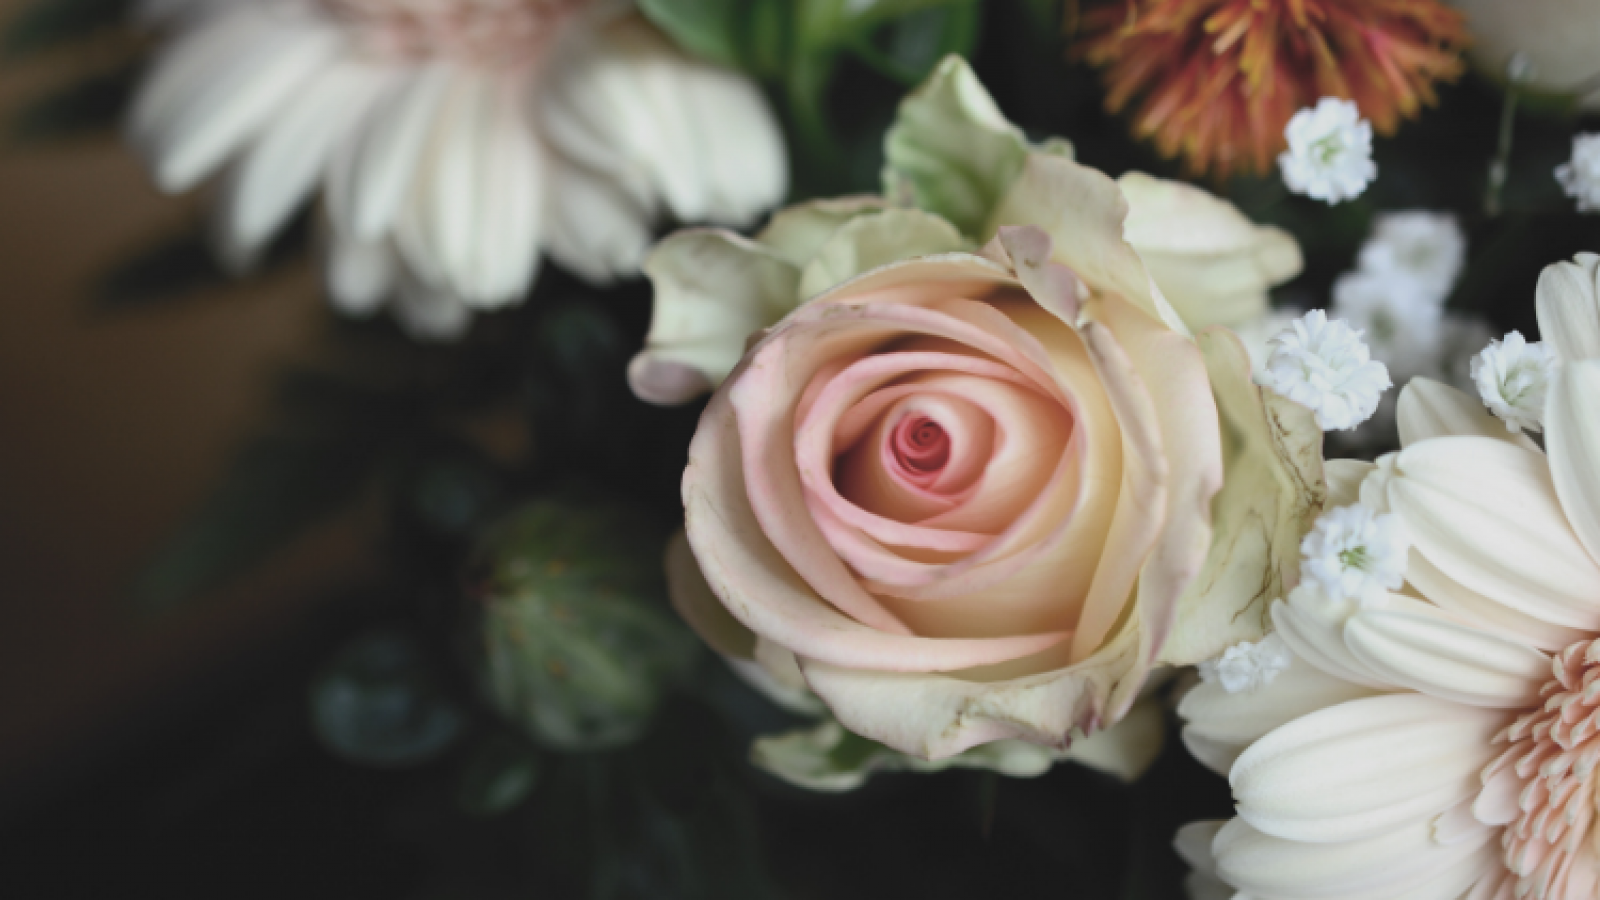 photo of a rose and other flowers